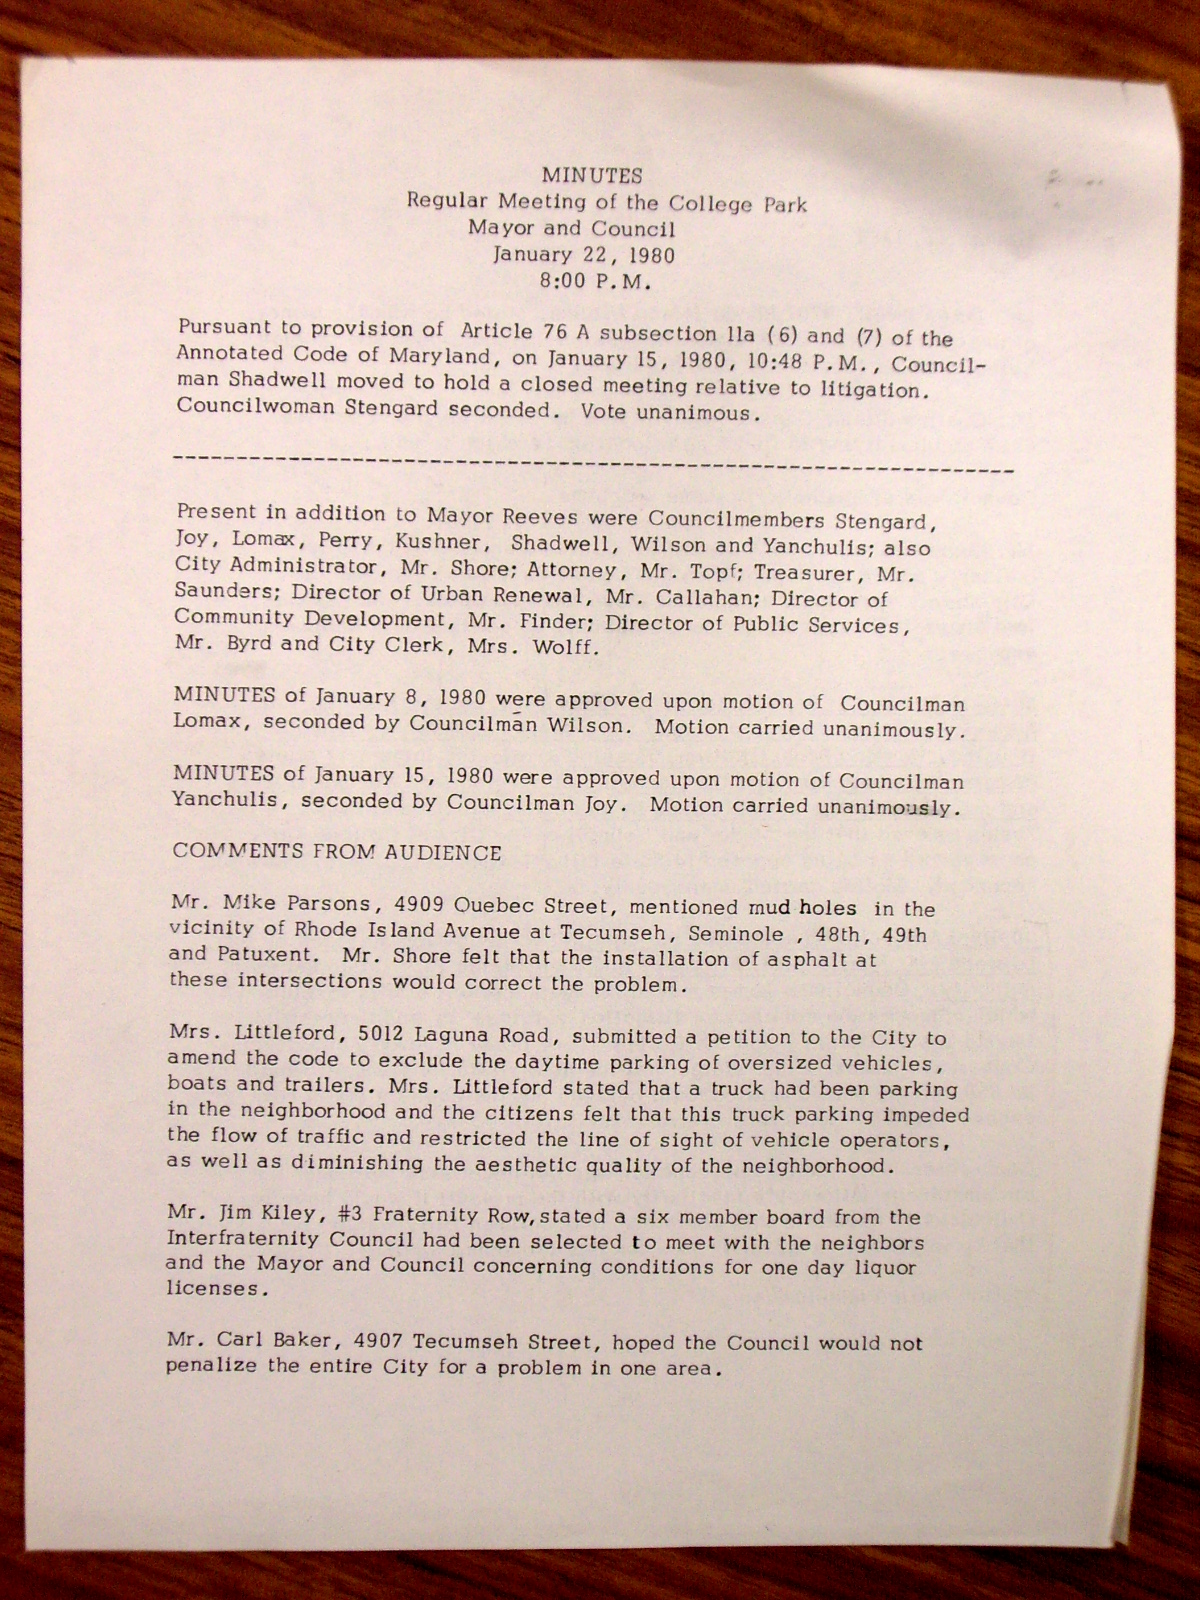 Minutes, Regular Meeting of the College Park Mayor and Council, January 22 1980